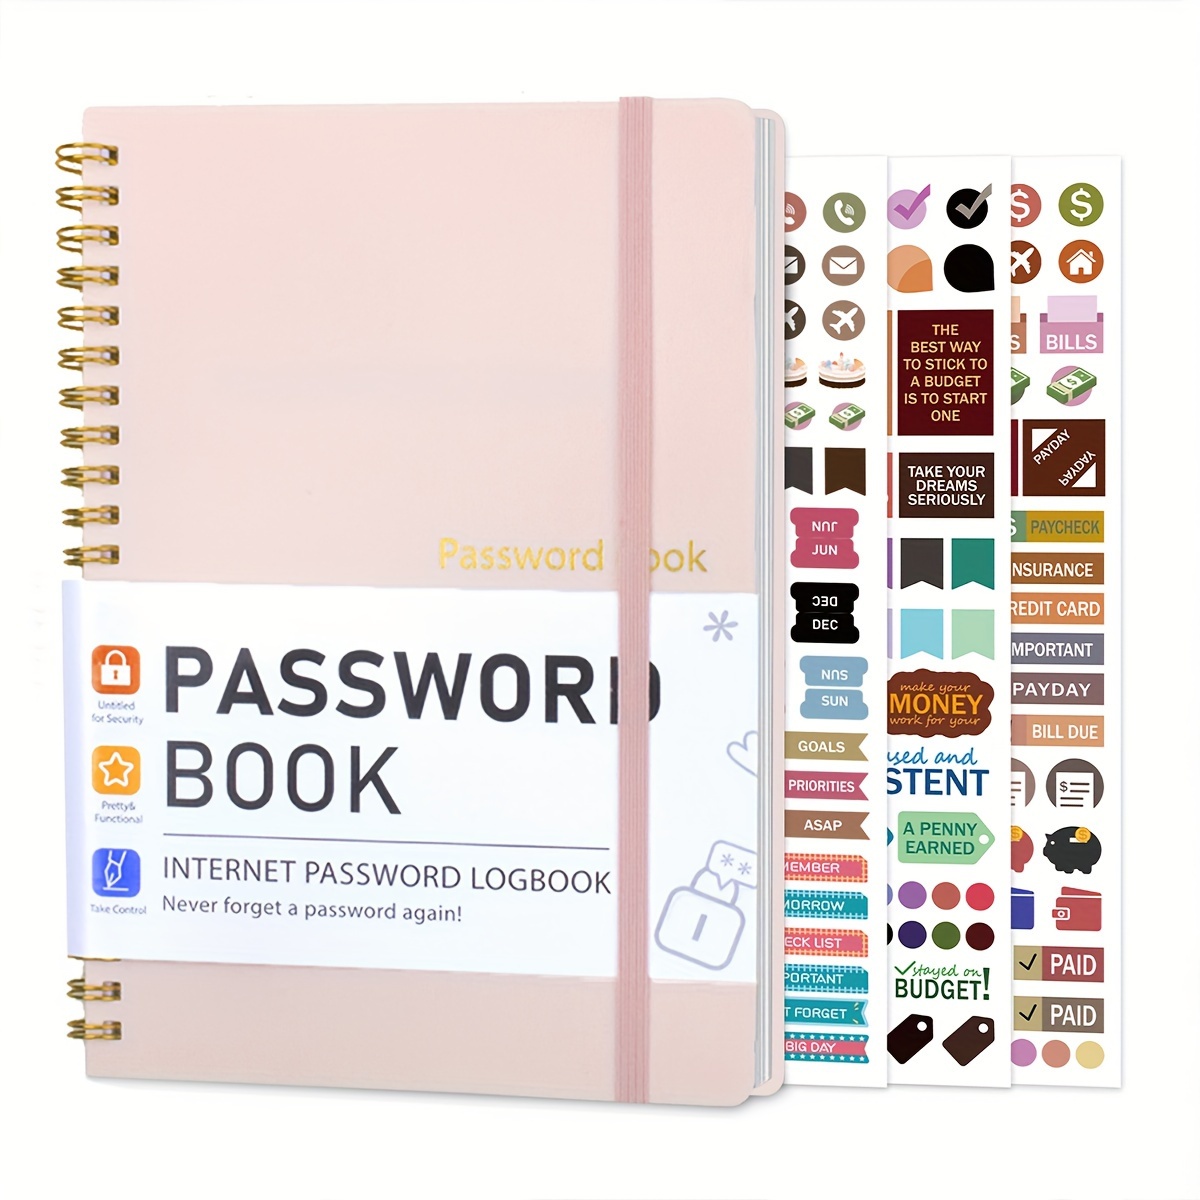 

Trees Password Organizer Logbook With Pvc Cover And Twin-wire Spiral Binding – Internet Password Logbook With Waterproof Cover, Double-sided Pocket, And Sticker Bundle For Secure Password Management